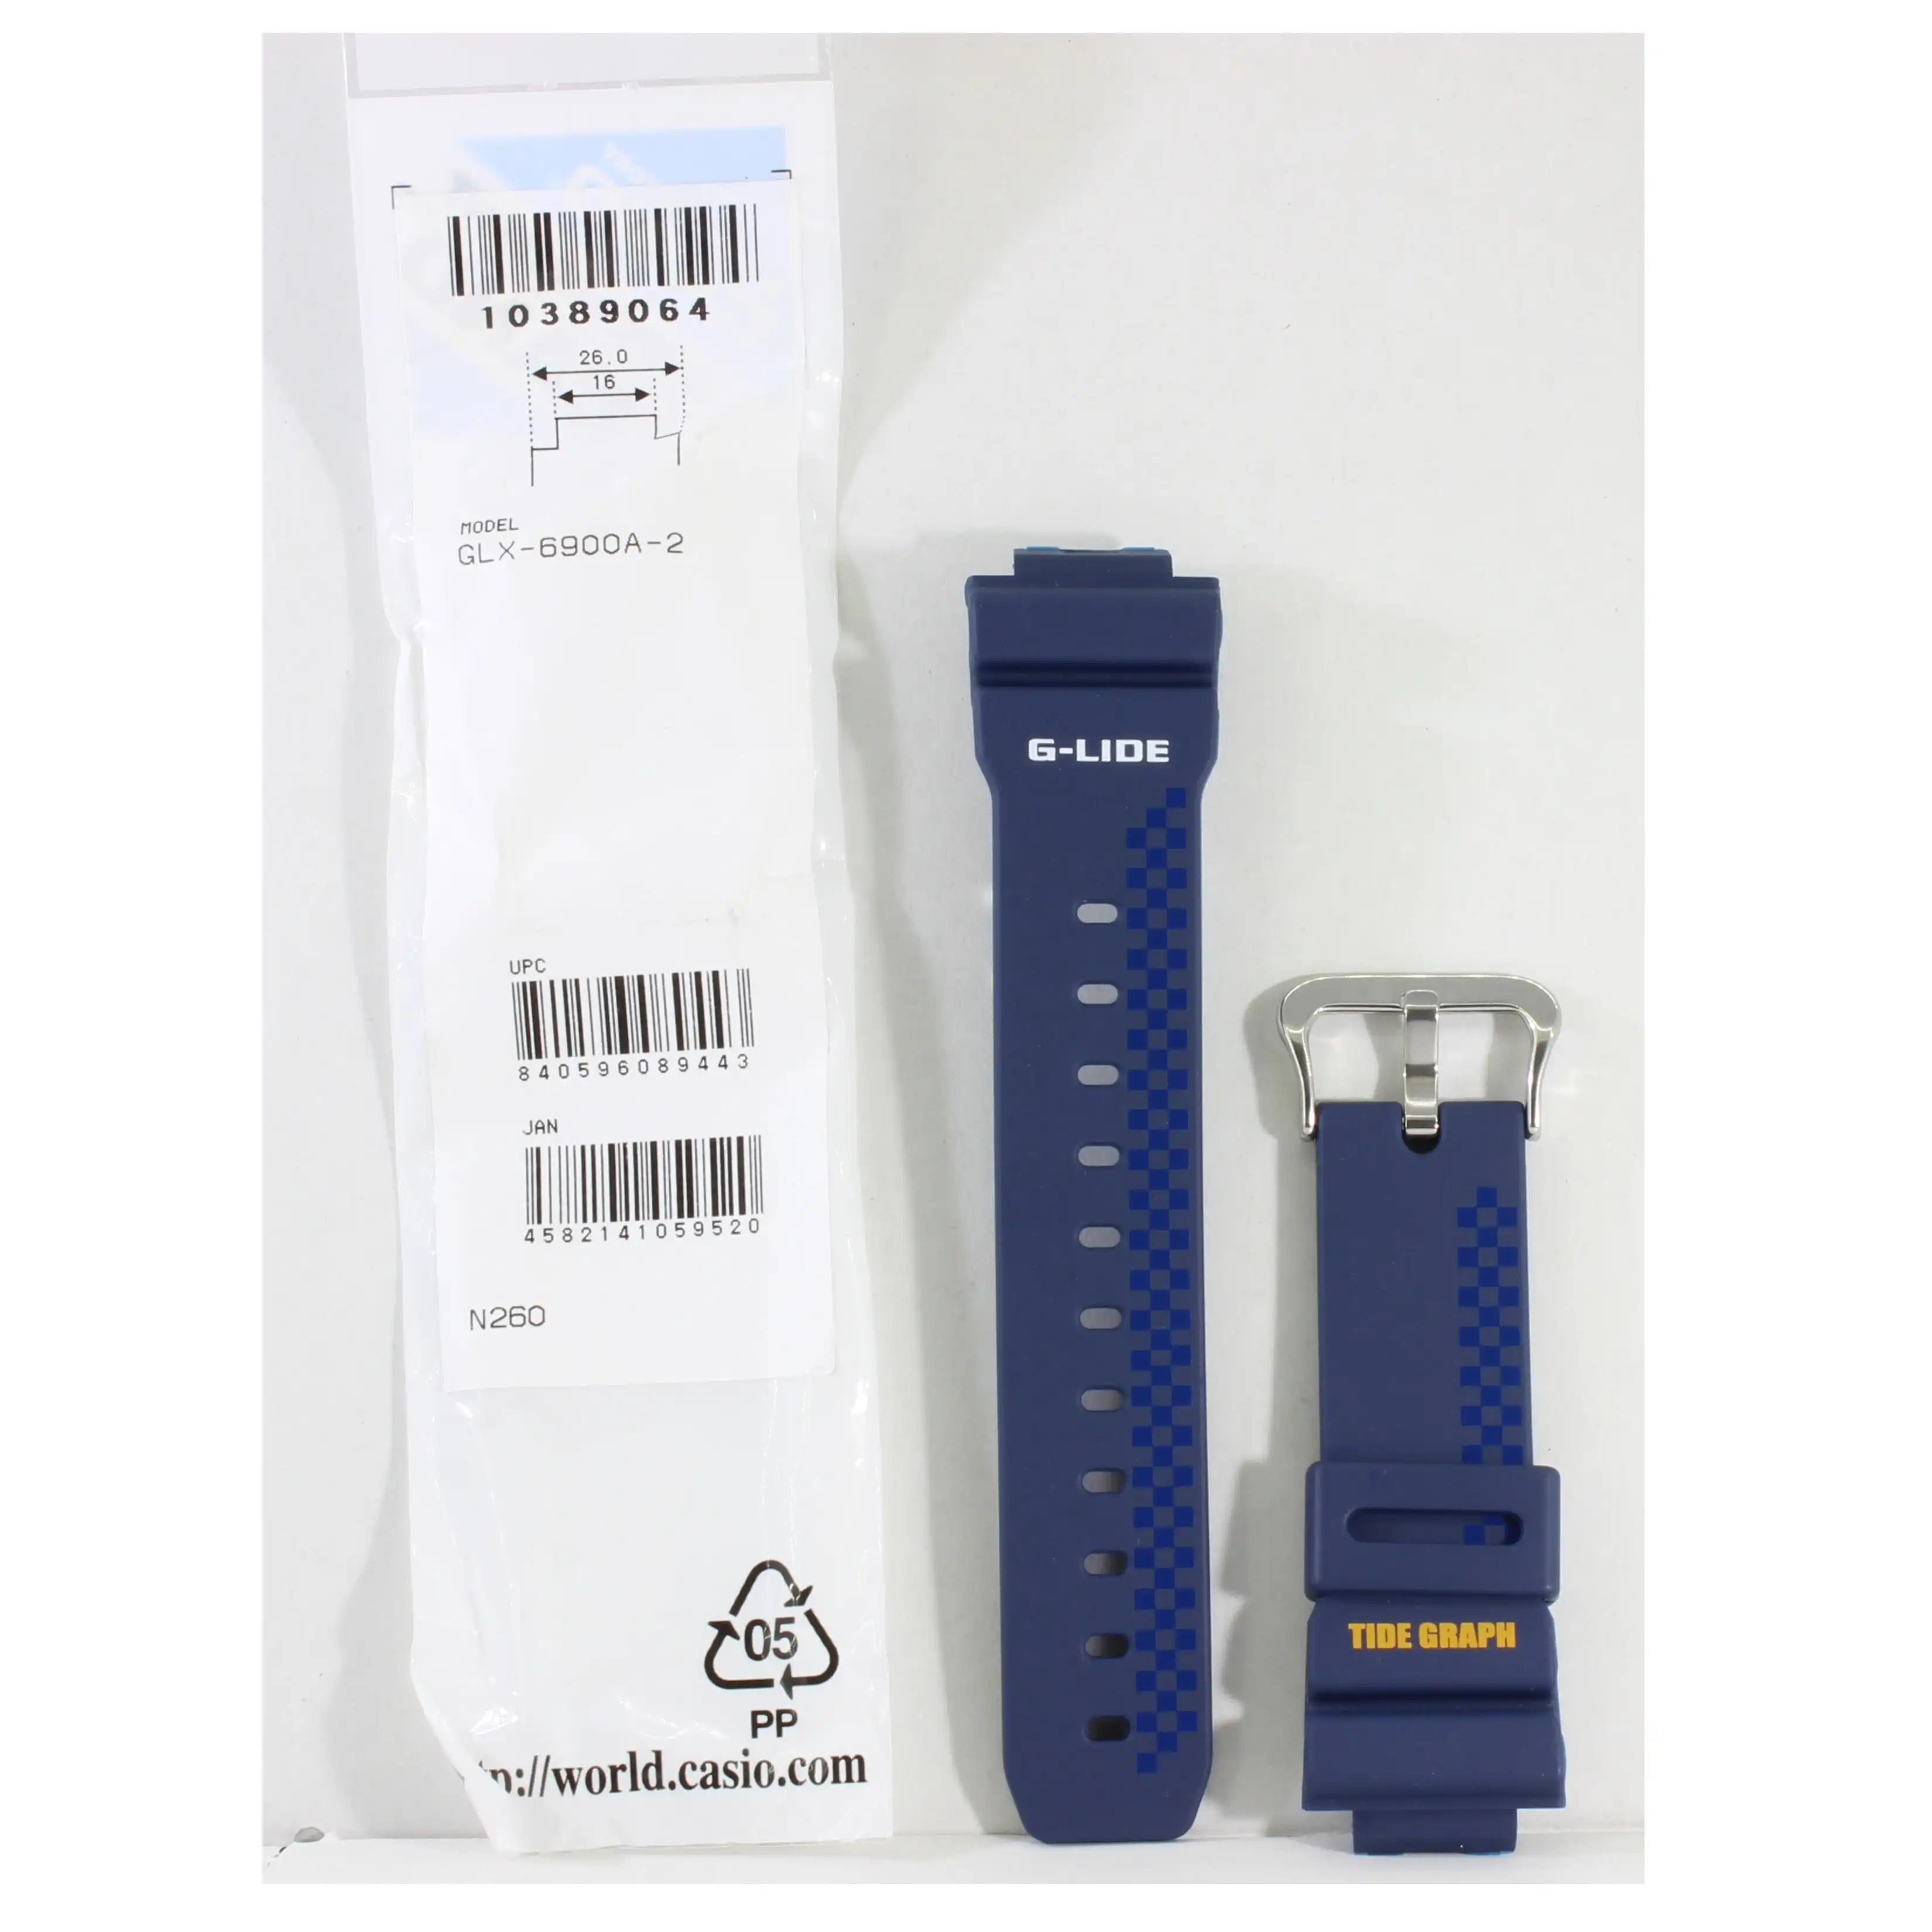 Casio G-Shock Matte Blue Genuine Replacement Strap 10389064 to suit GLX-6900A-2 G-Lide